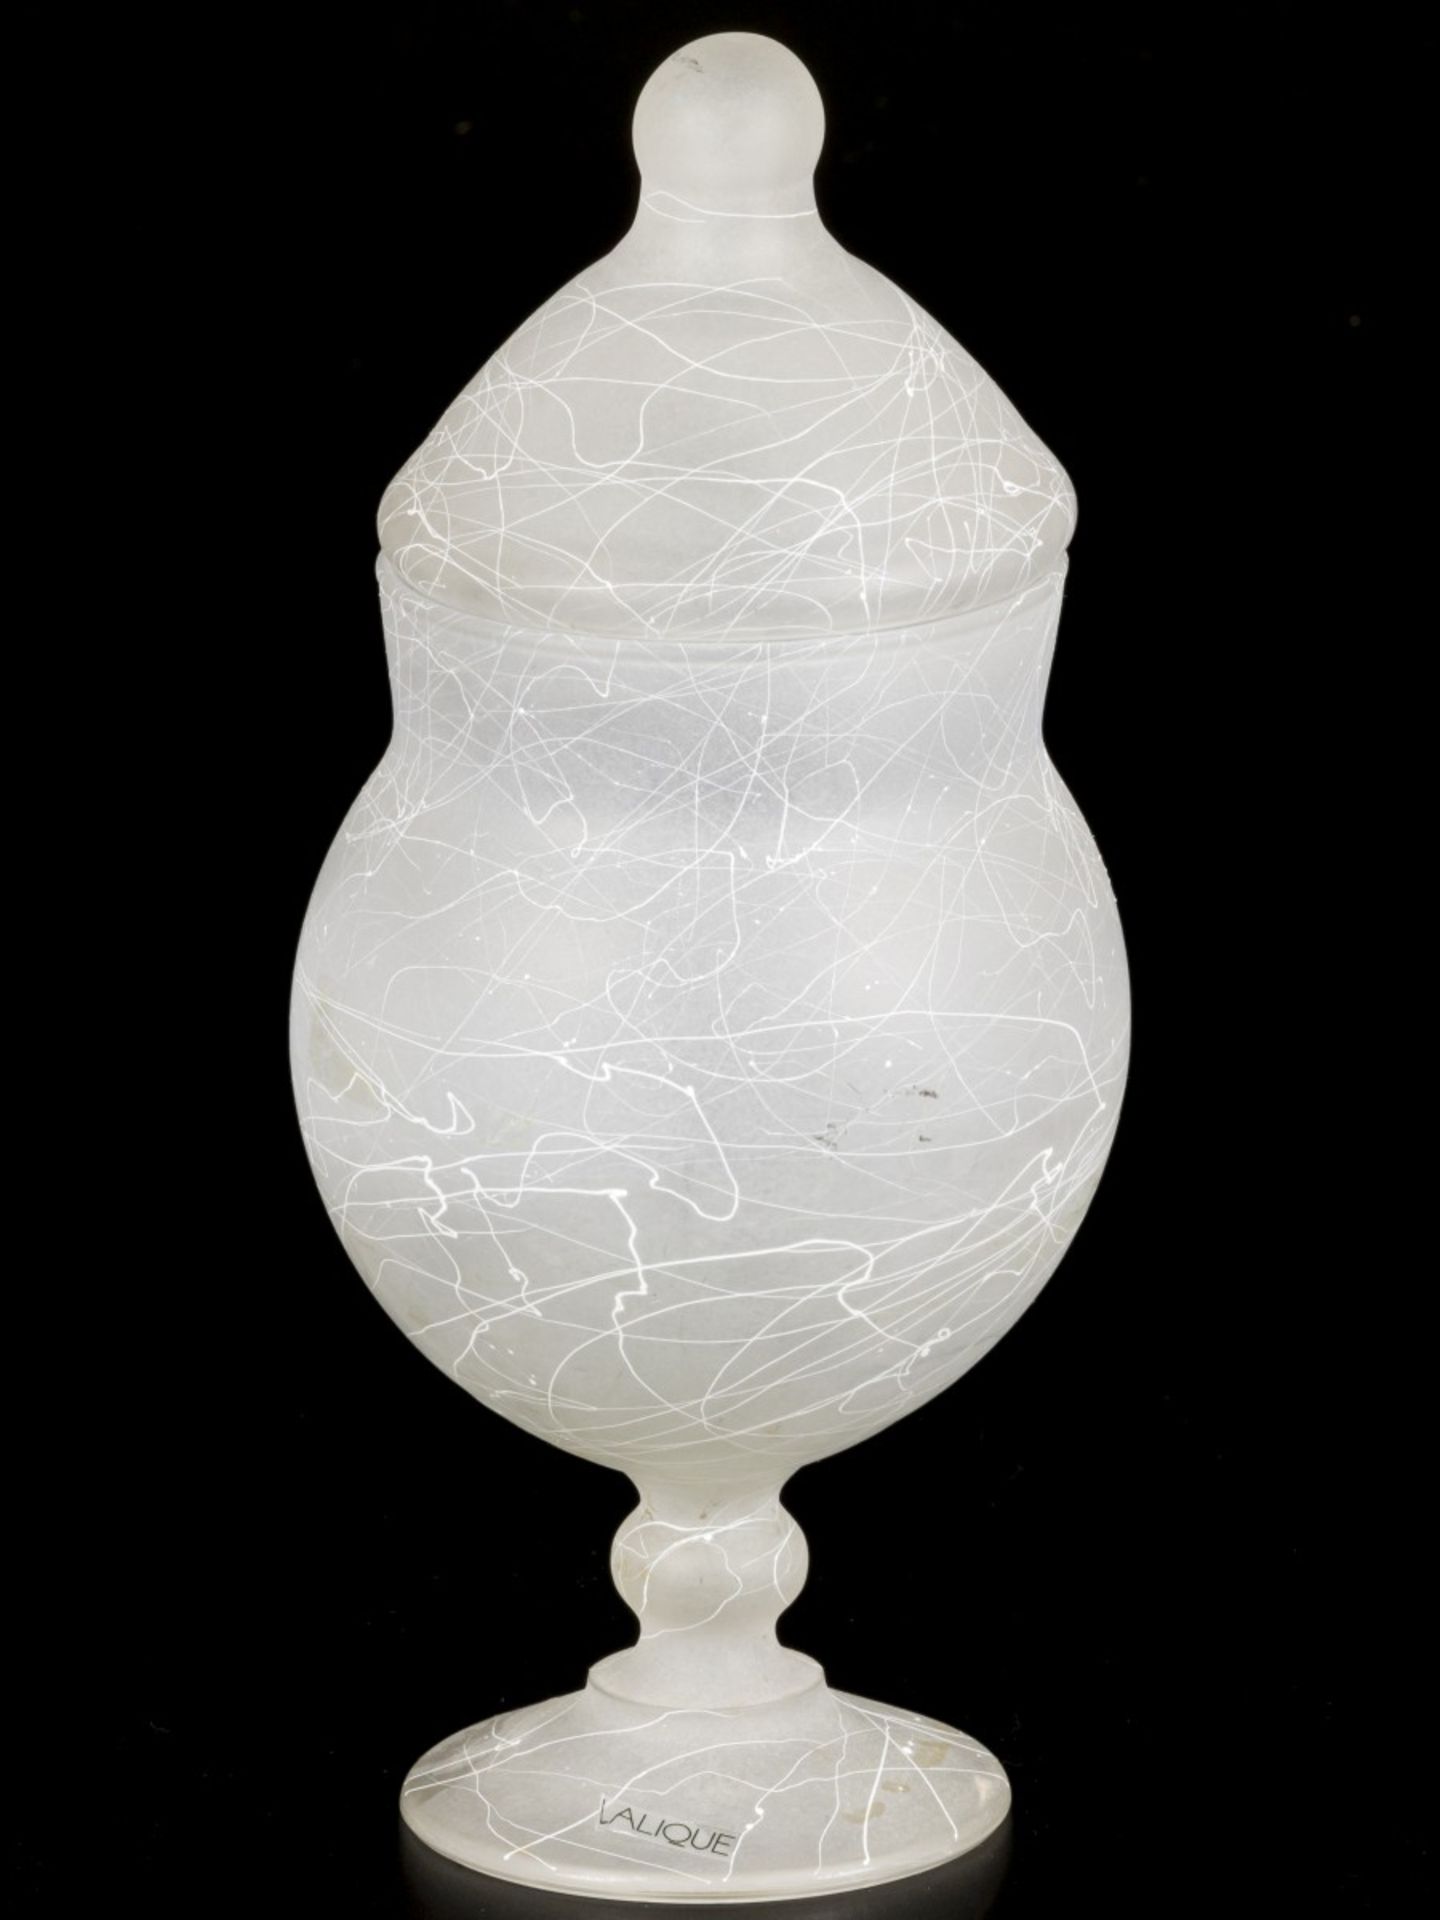 A Lalique frosted/satin glass lidded goblet on a stem, marked: Lalique, France, 20th century.